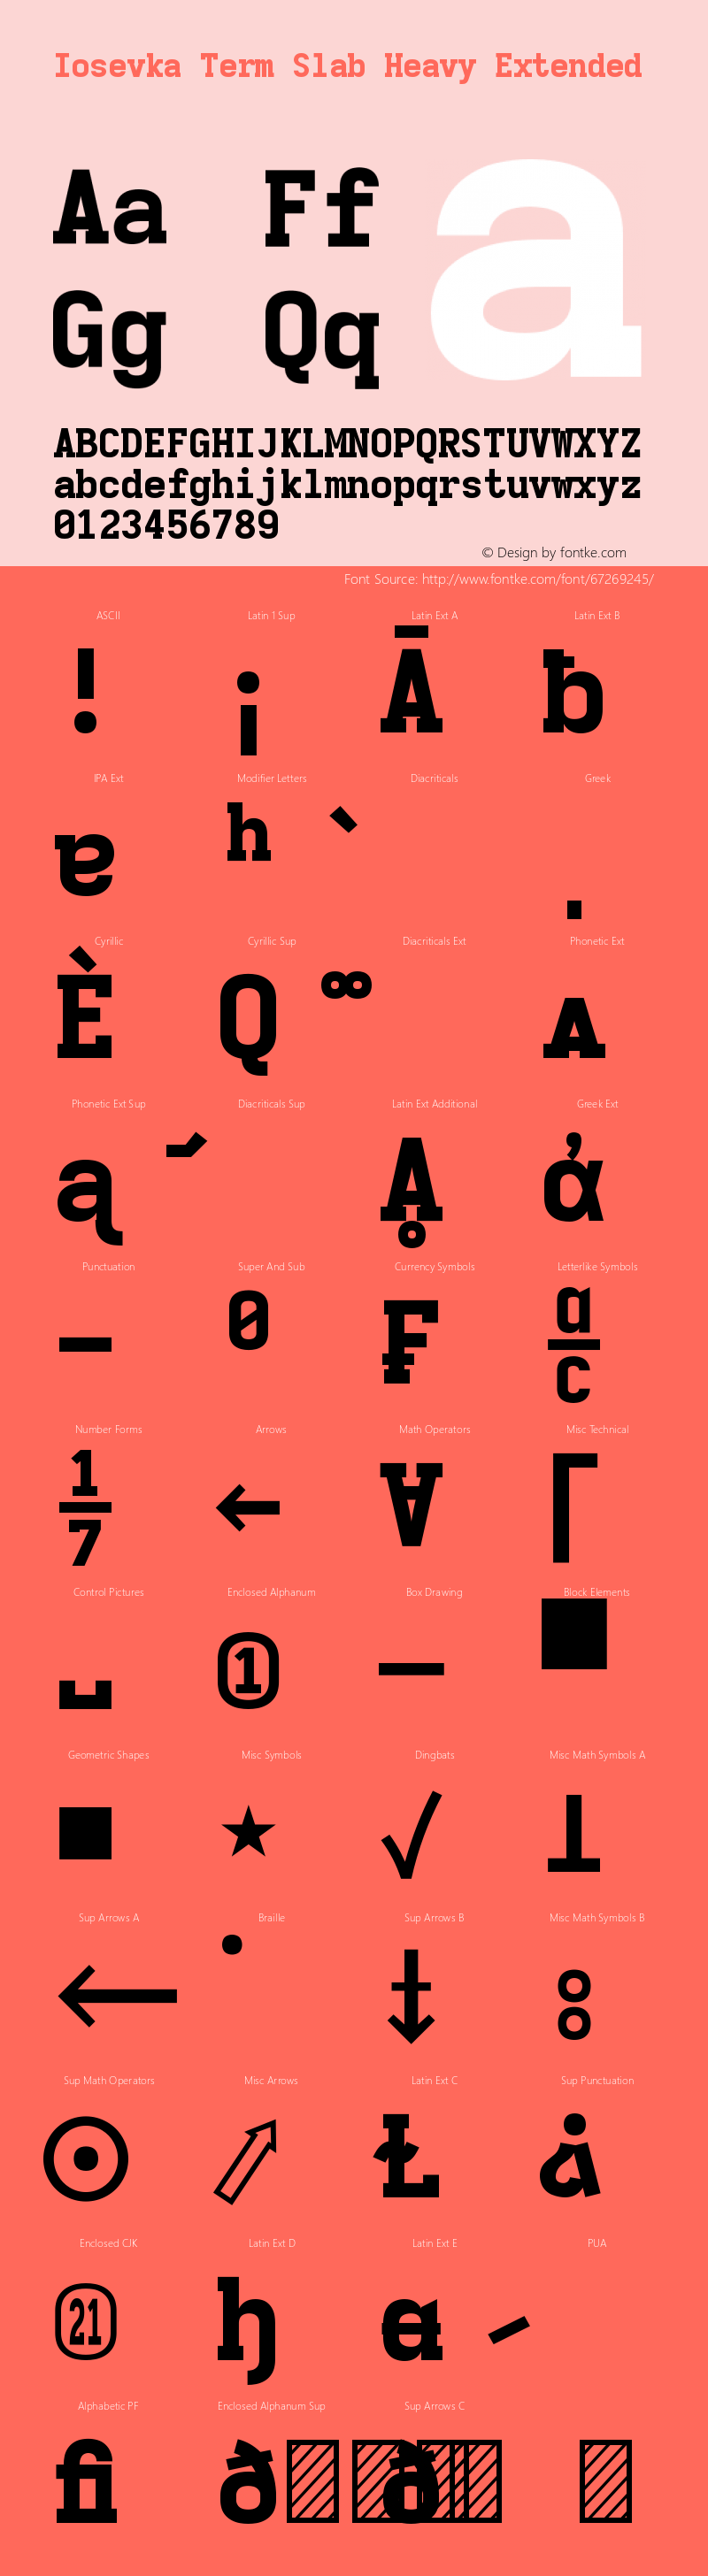 Iosevka Term Slab Heavy Extended 3.0.0-rc.7 Font Sample